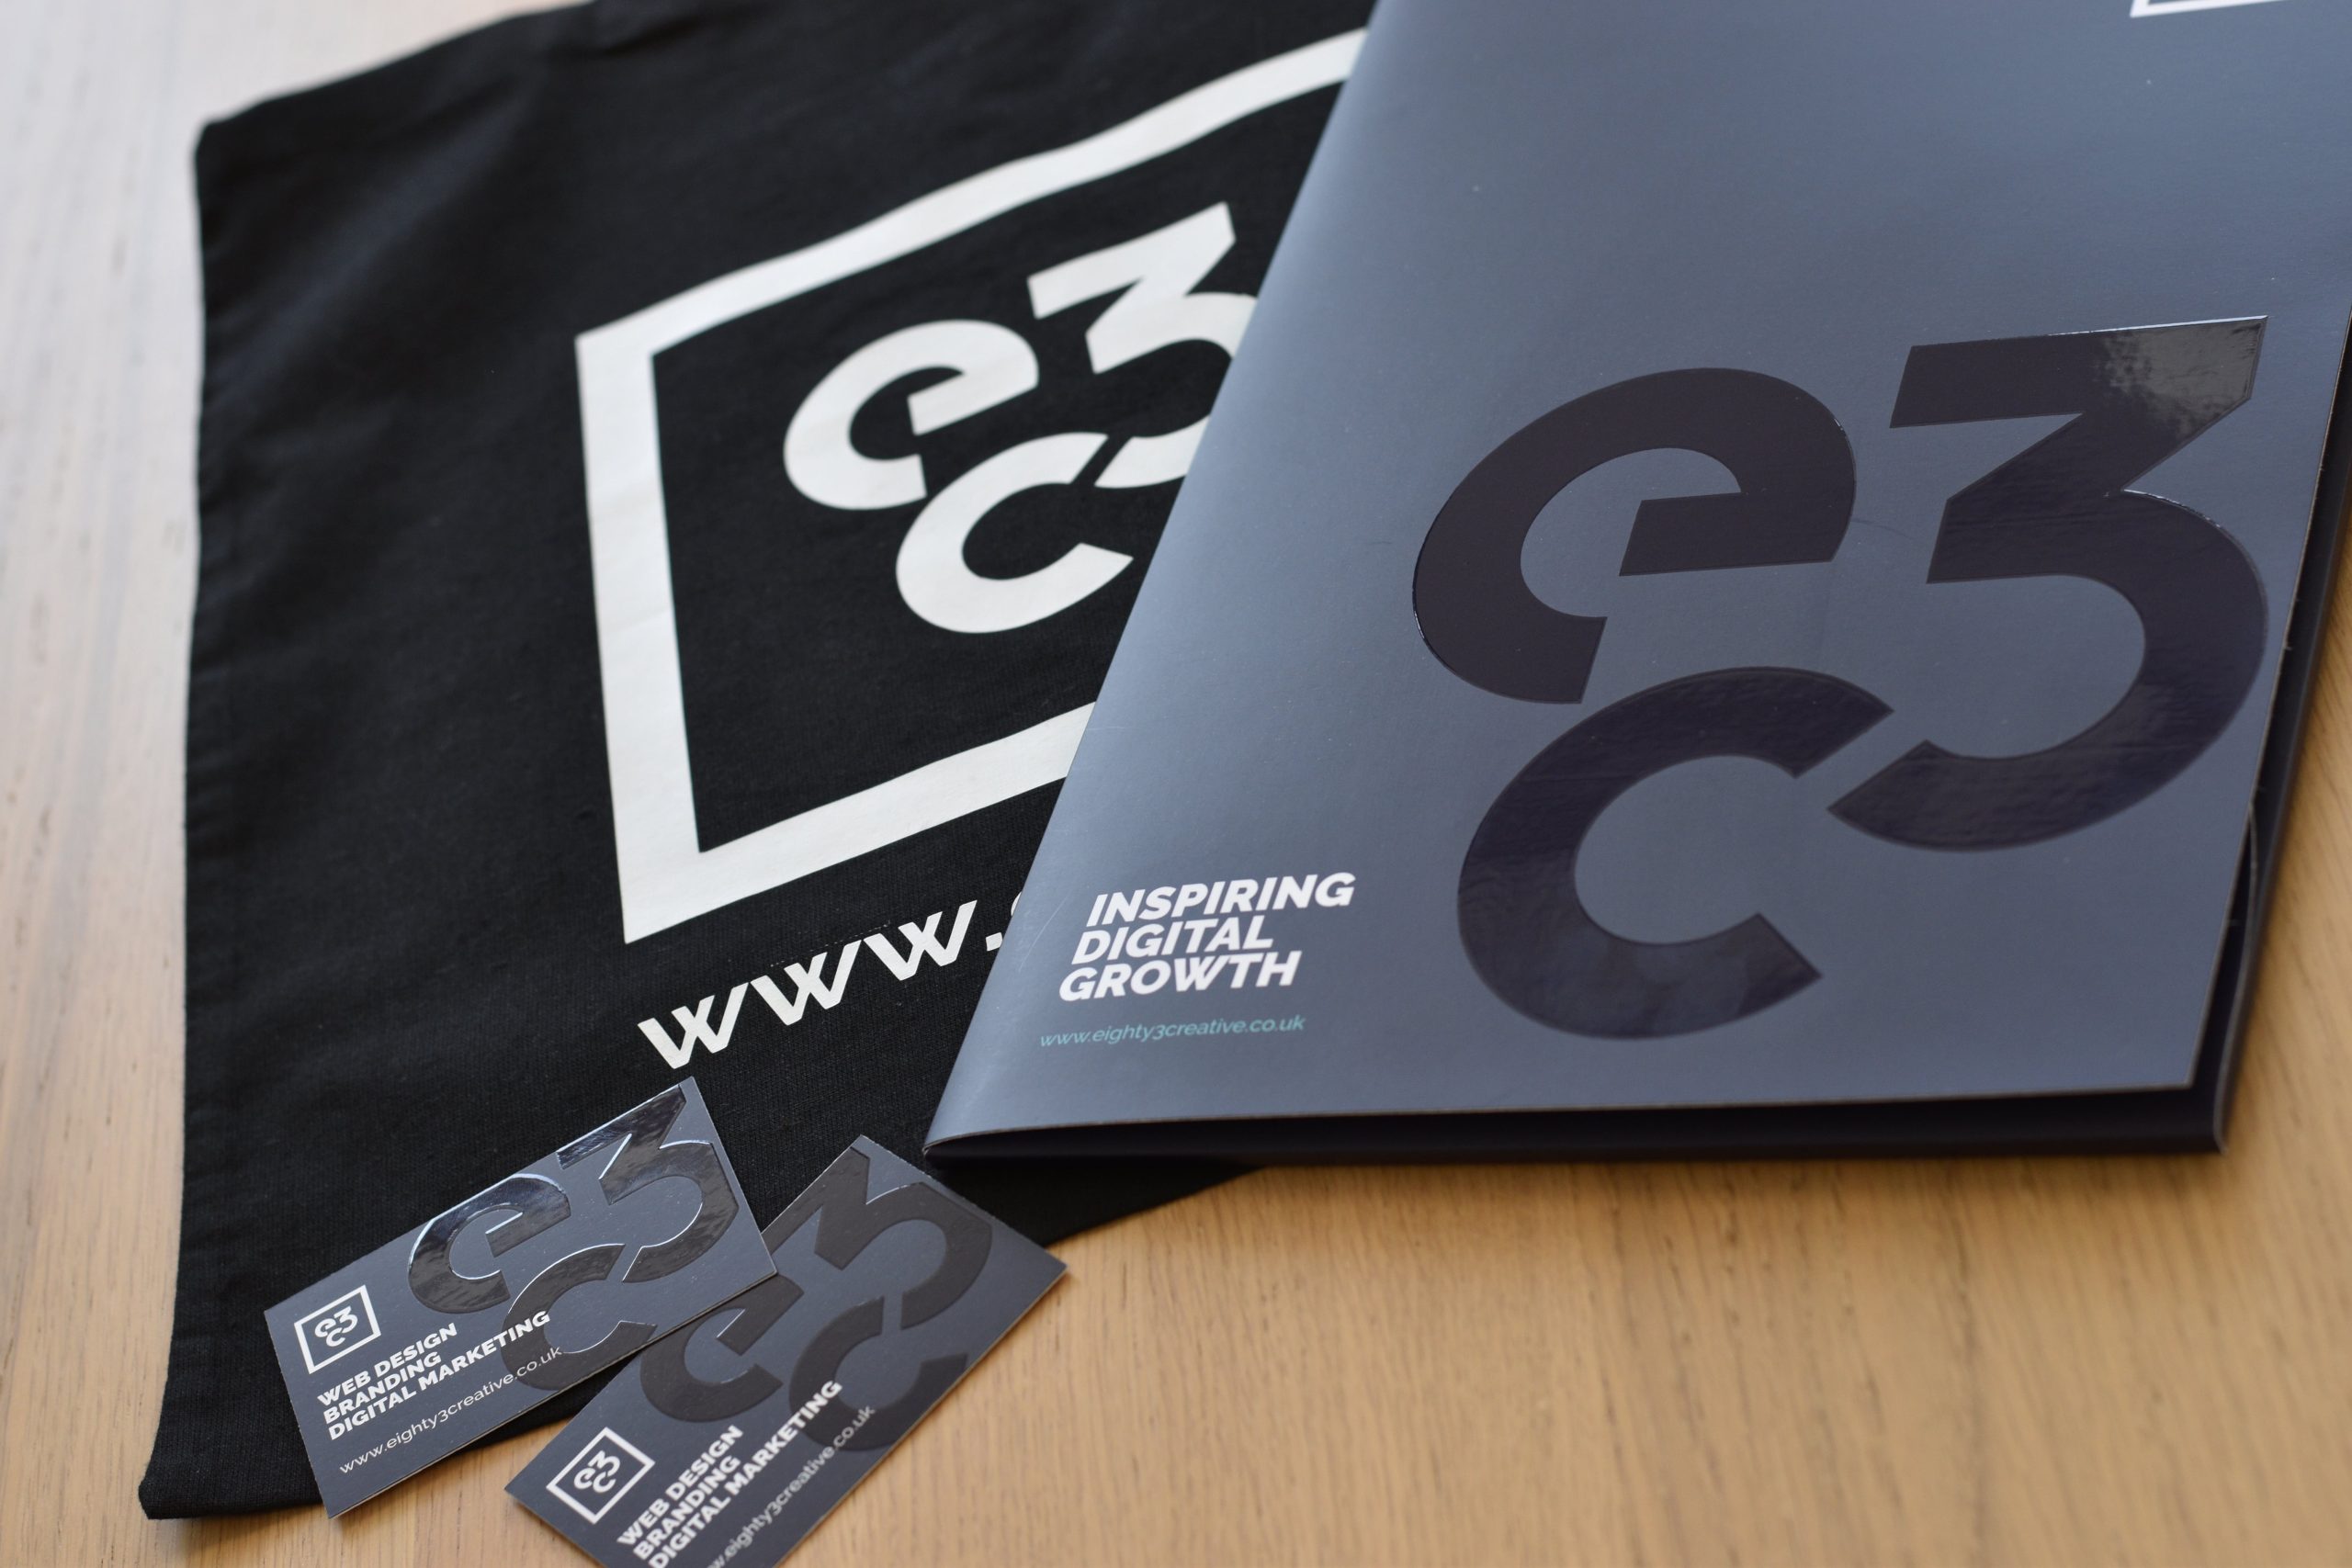 Brochures and business cards with Eighty3Creative branding